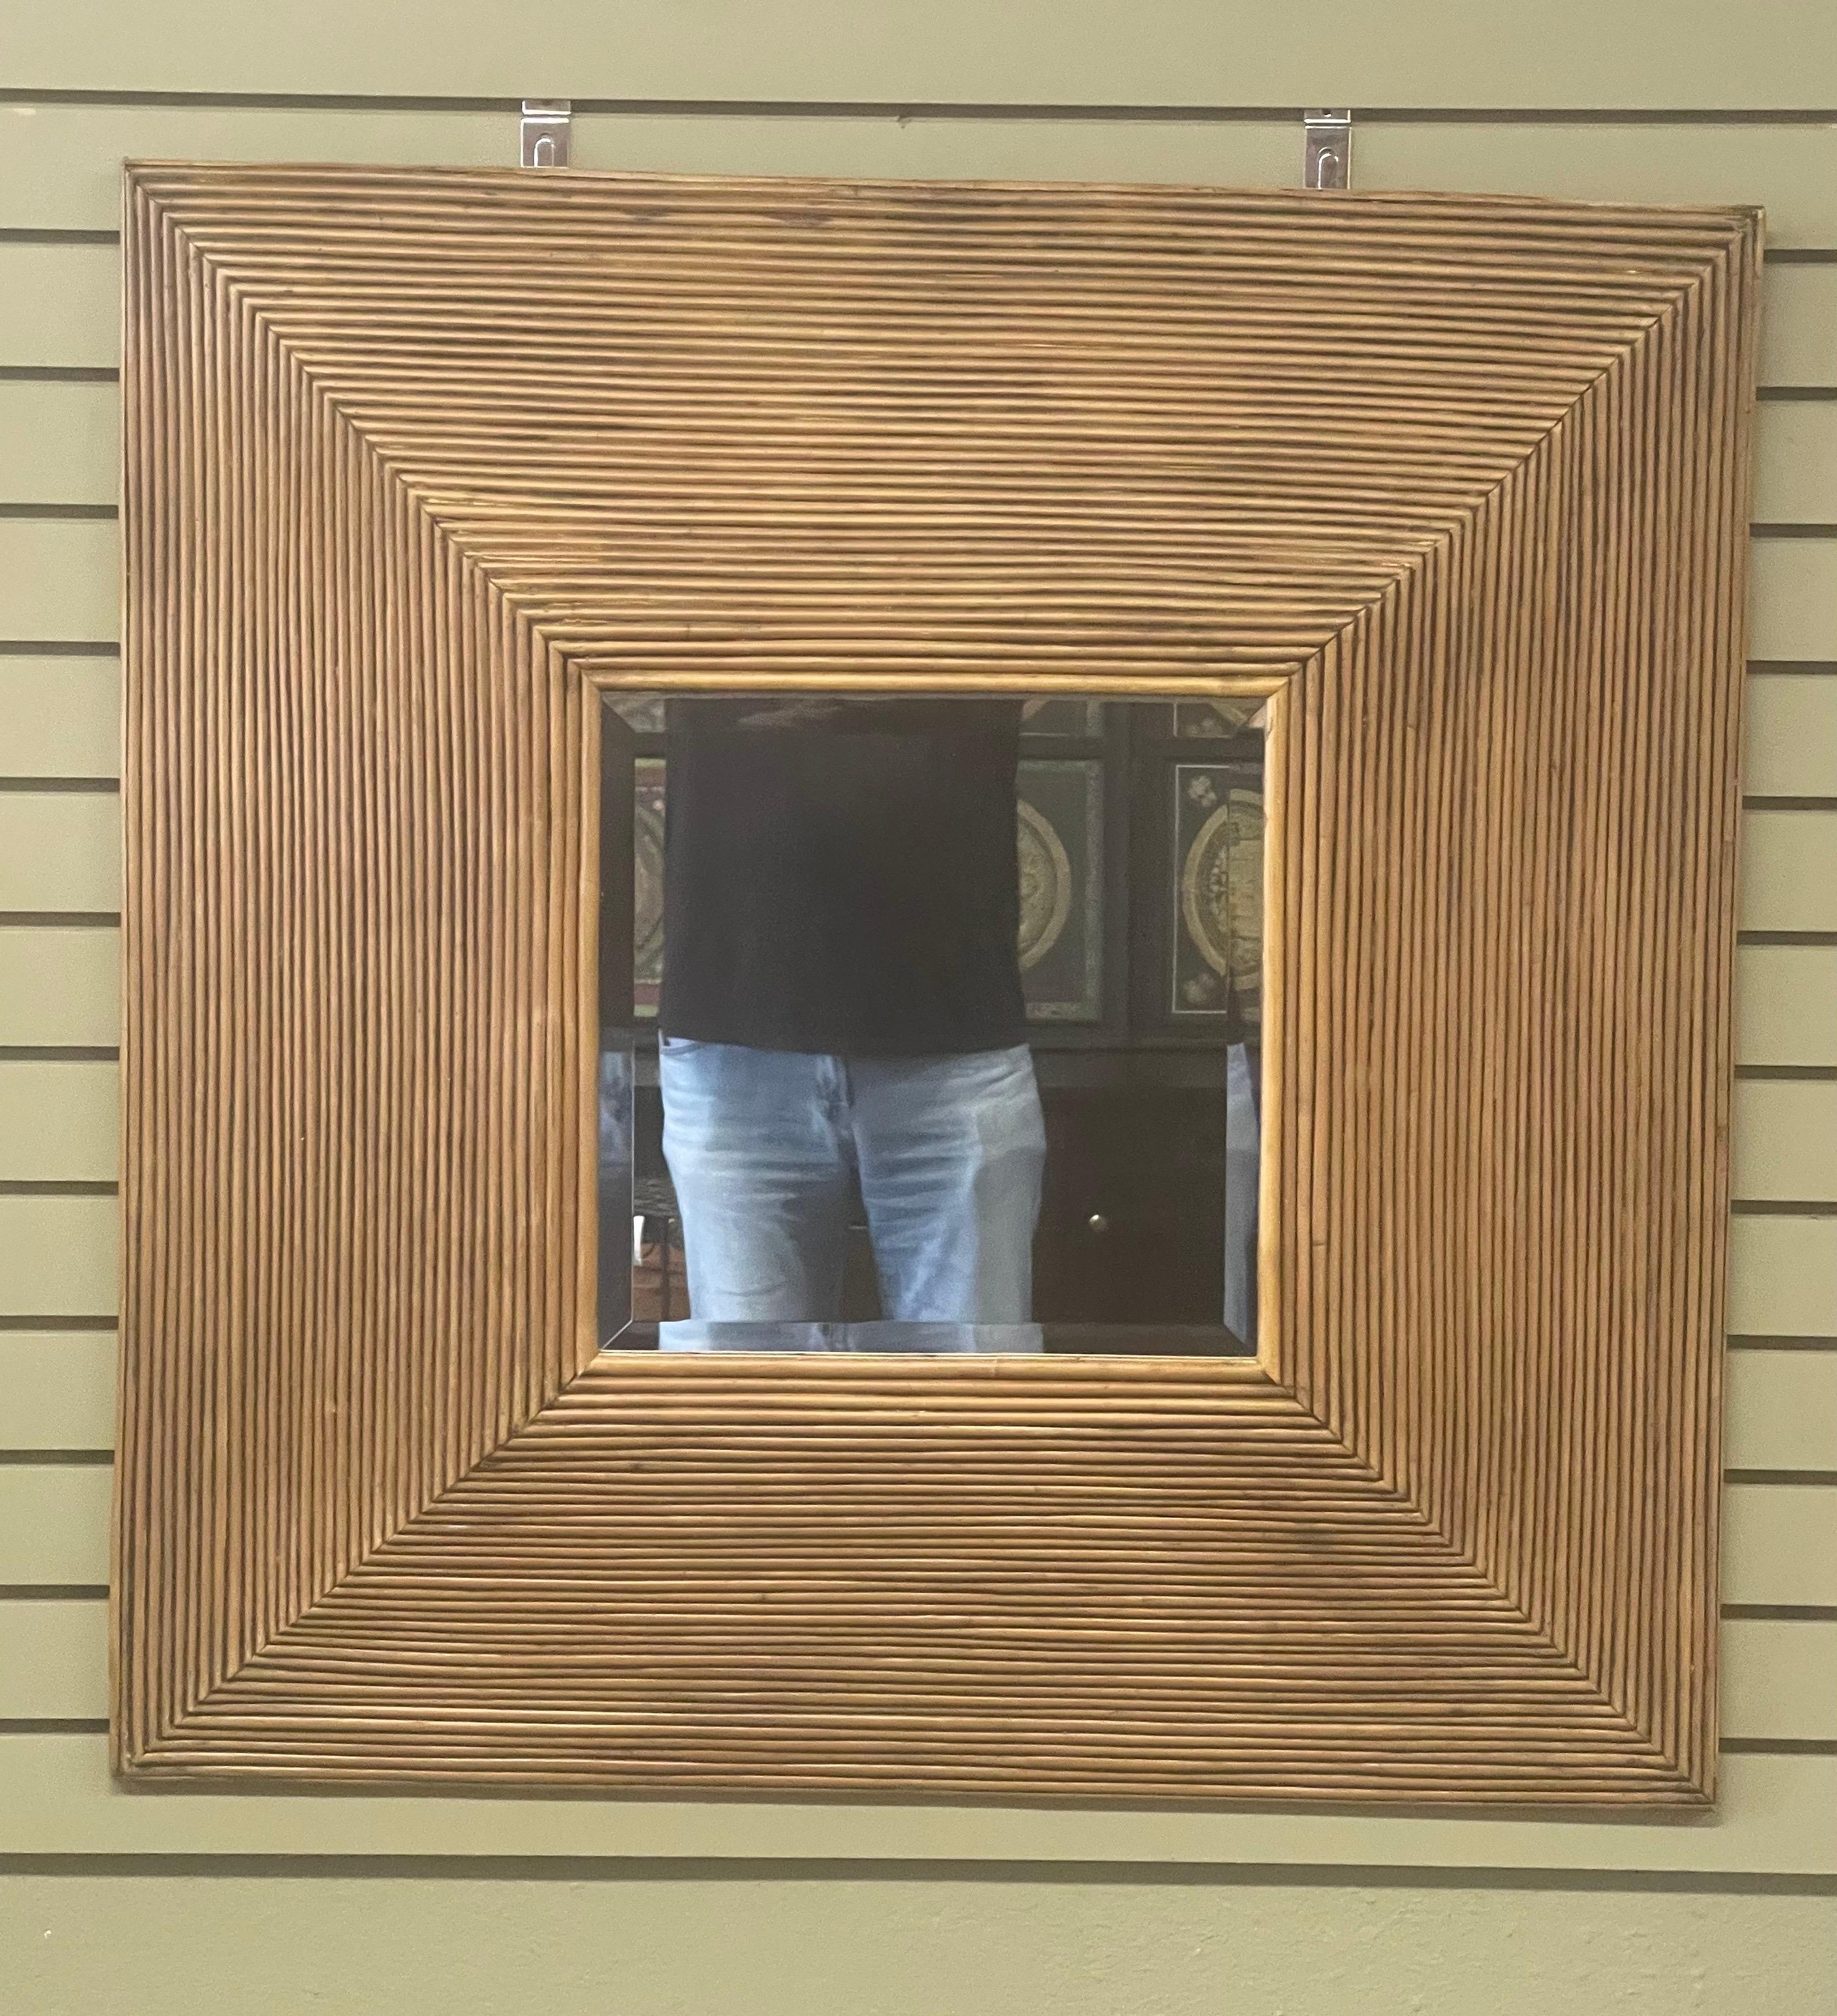 A beautiful square rattan / bamboo elevated mirror, circa 1990s. The mirror is in very good vintage condition and measures 35.25